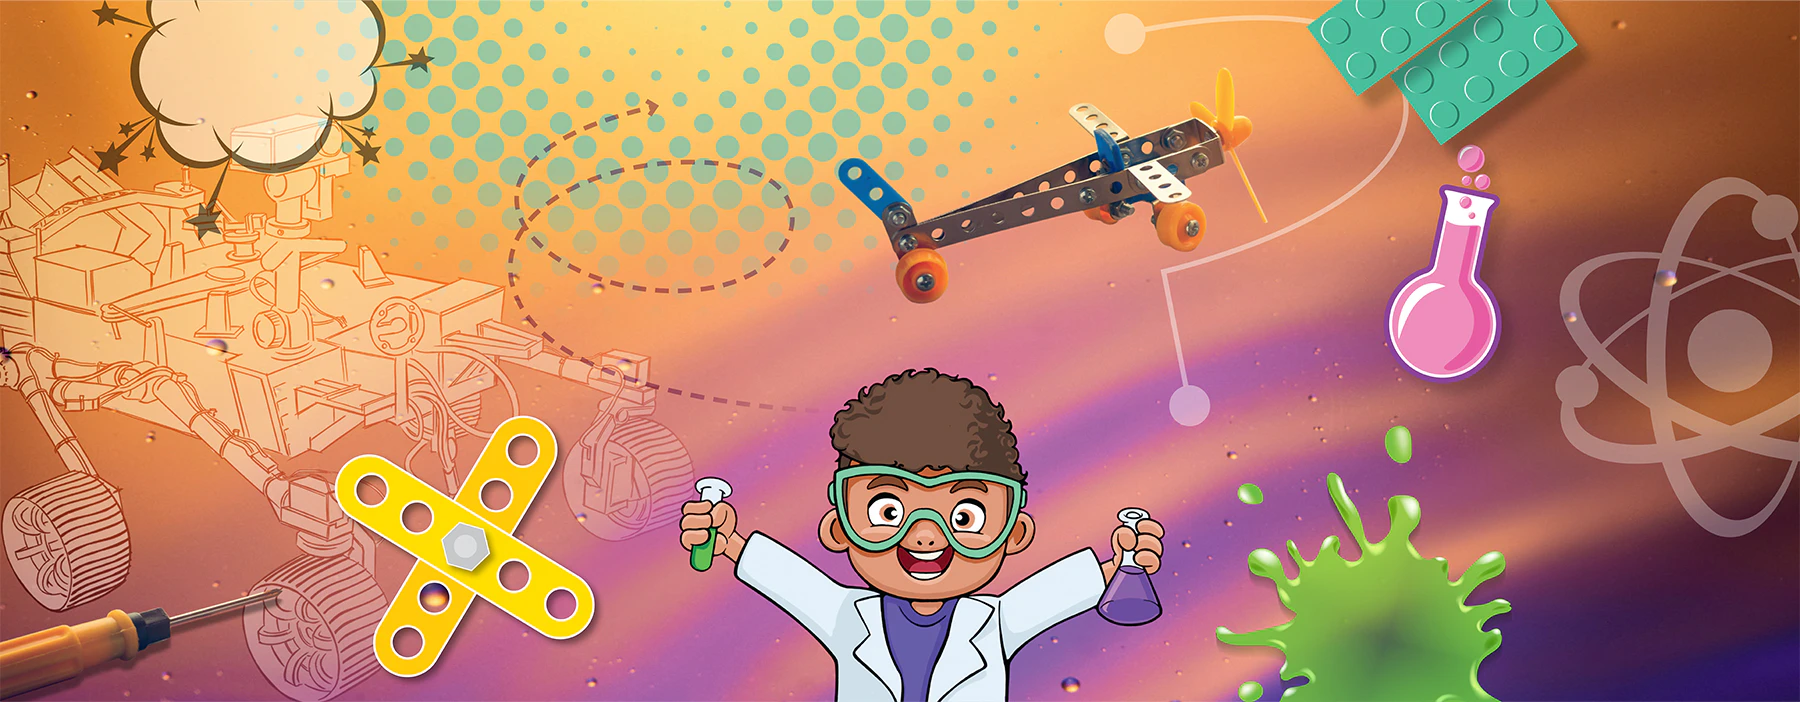 A cartoon illustration of a child dressed in a lab coat with a lot of things you might find in a science lab floating around them.